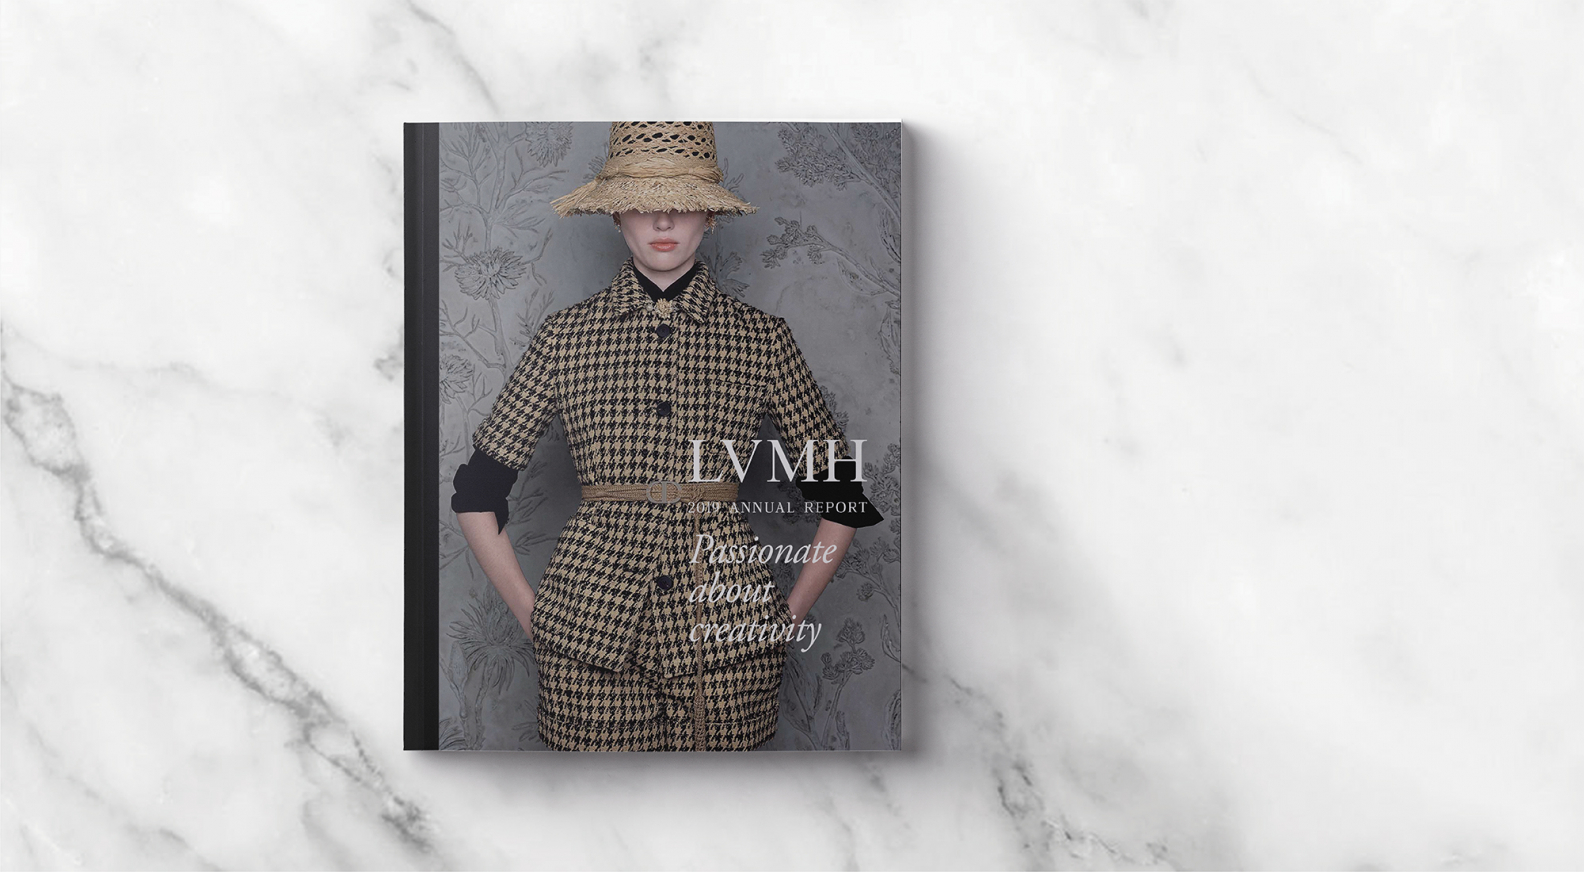 LVMH. A remarkable journey of growth.